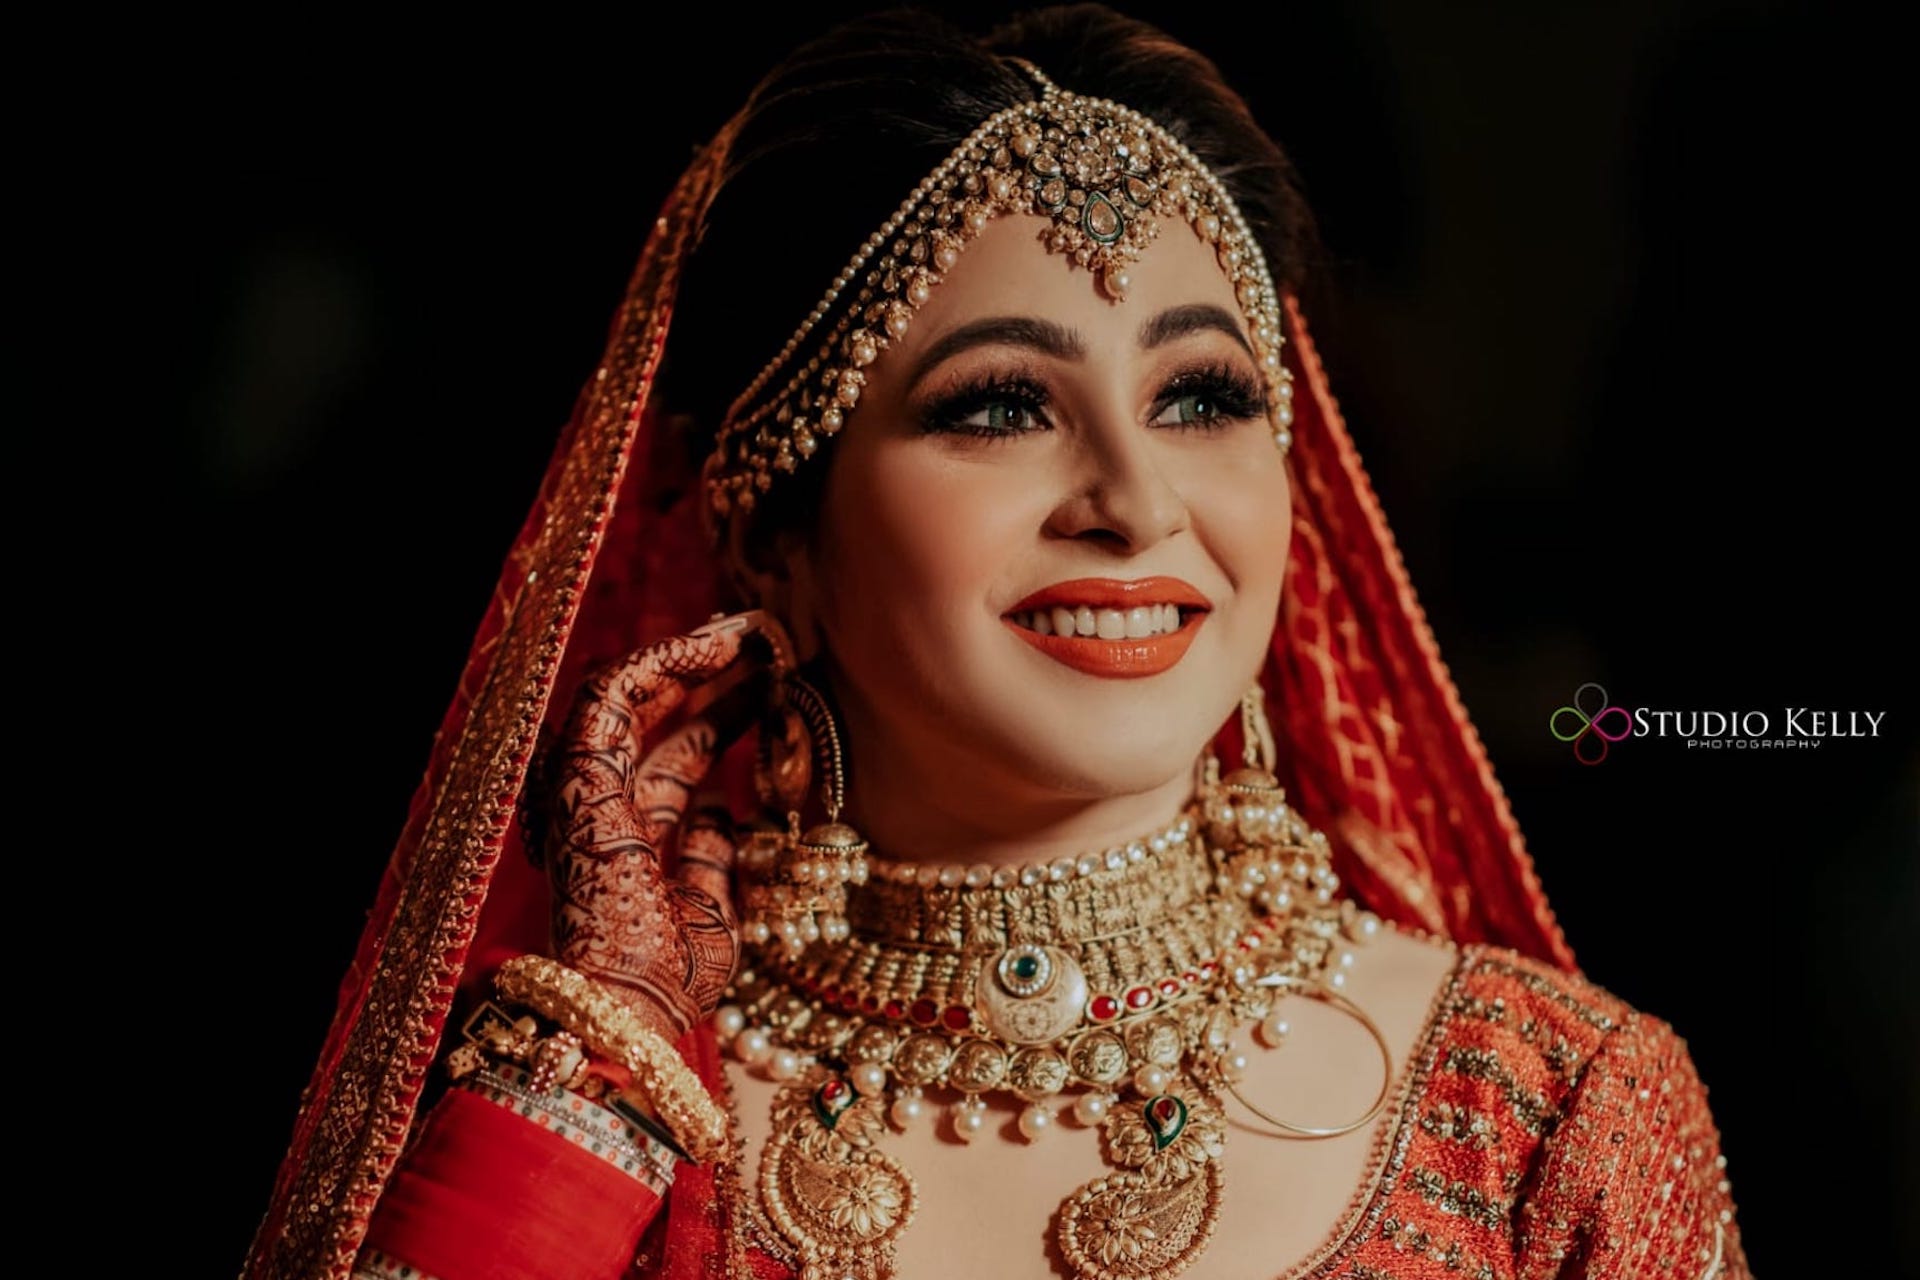 Indian Wedding Photography Trends